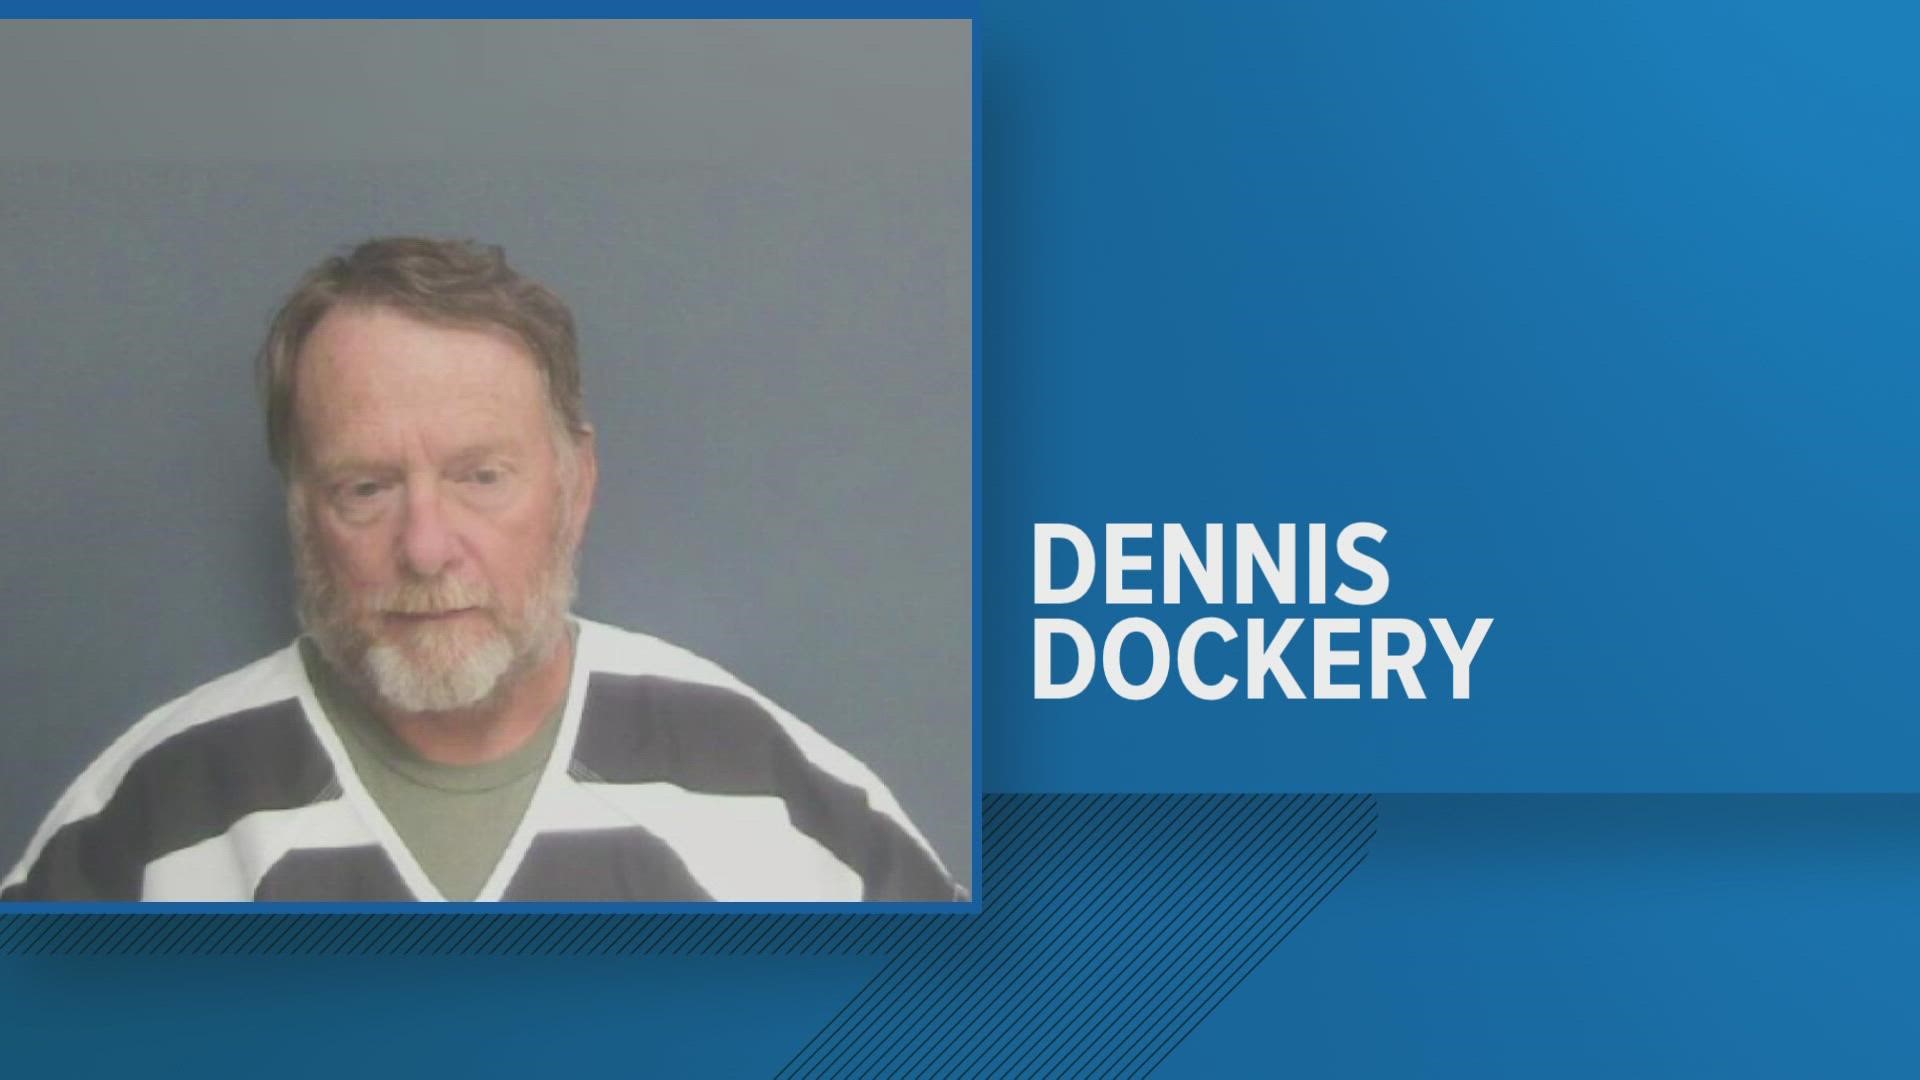 Dennis Dewayne Dockery, 67, was arrested Wednesday after a Georgia investigation found that he could have been molesting children since 2002.